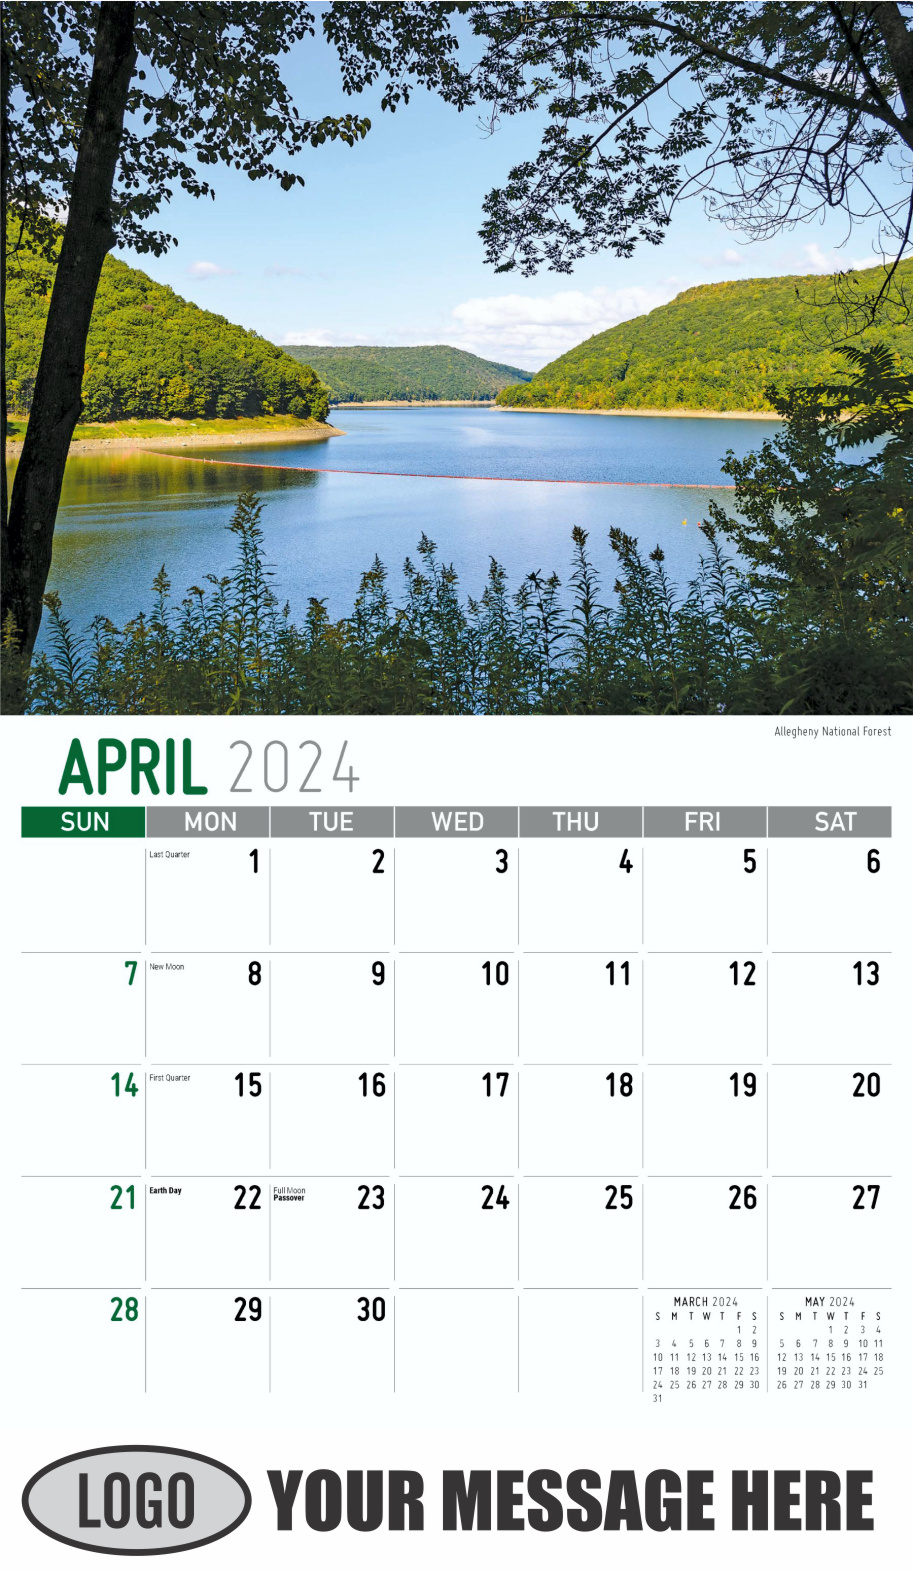 Scenes of New York 2024 Business Promotional Wall Calendar - April